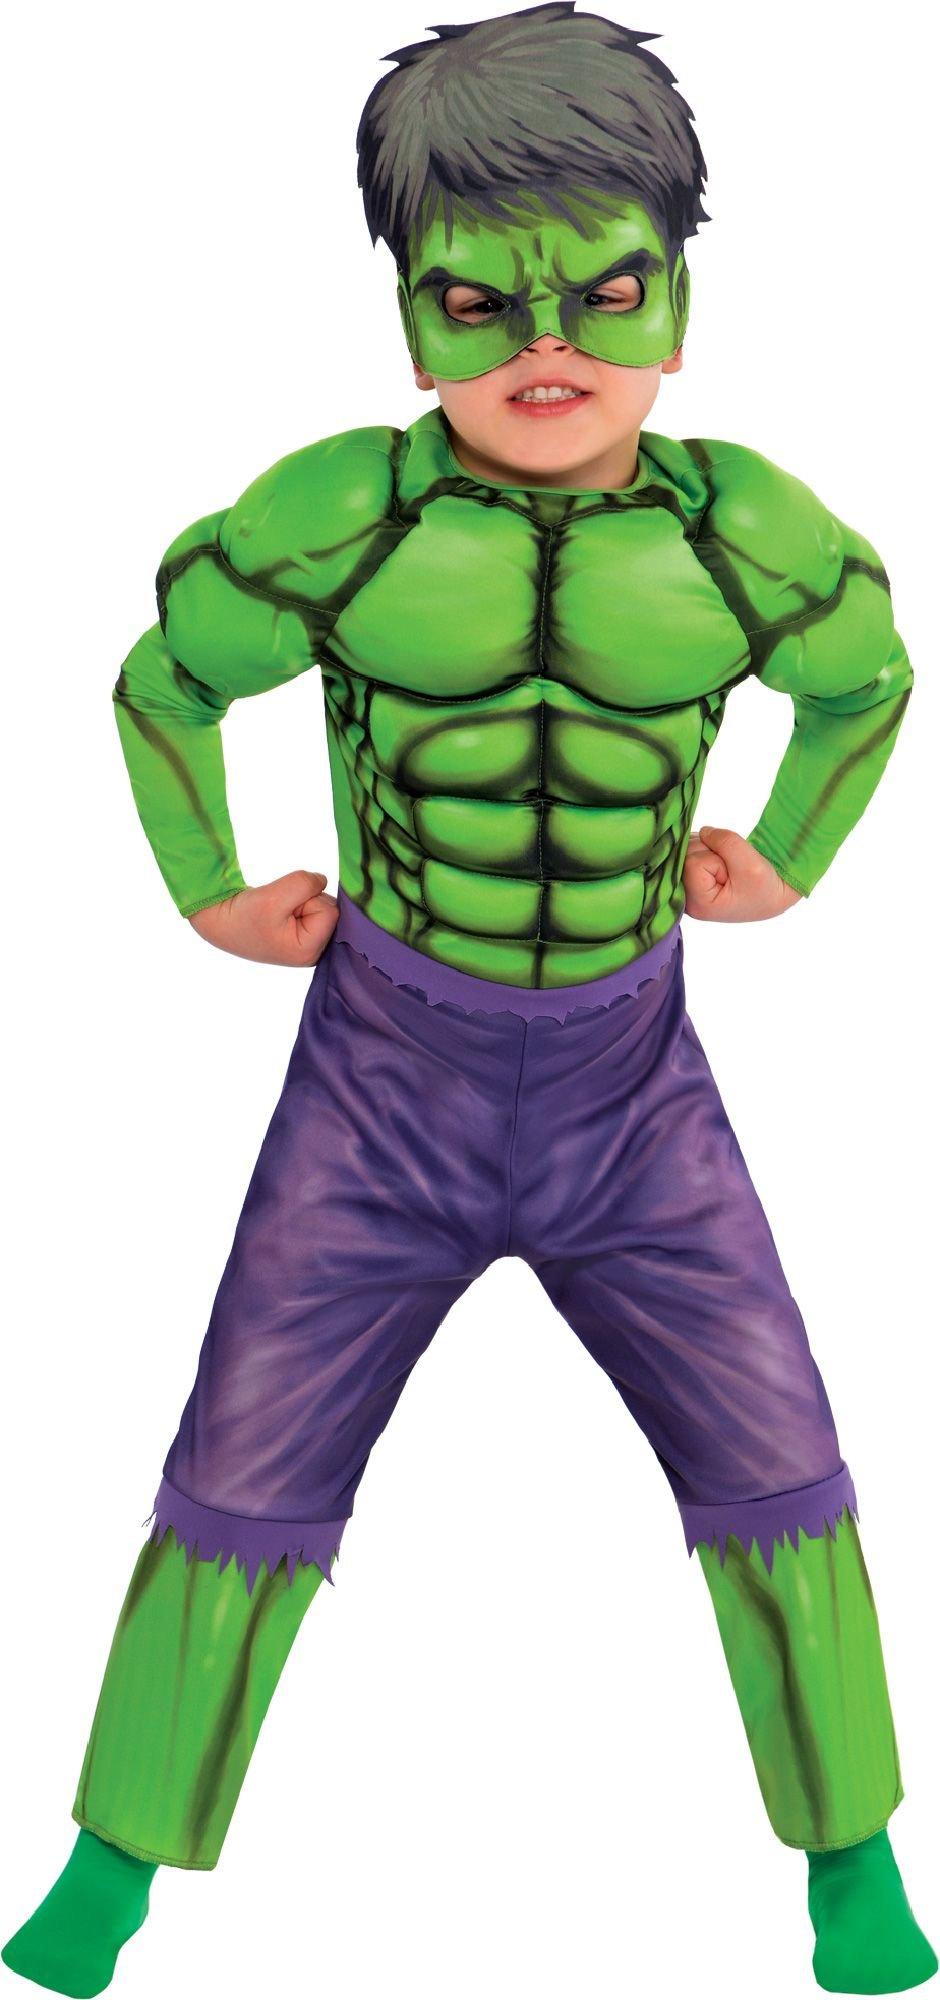 Toddler Boys Hulk Muscle Costume Classic